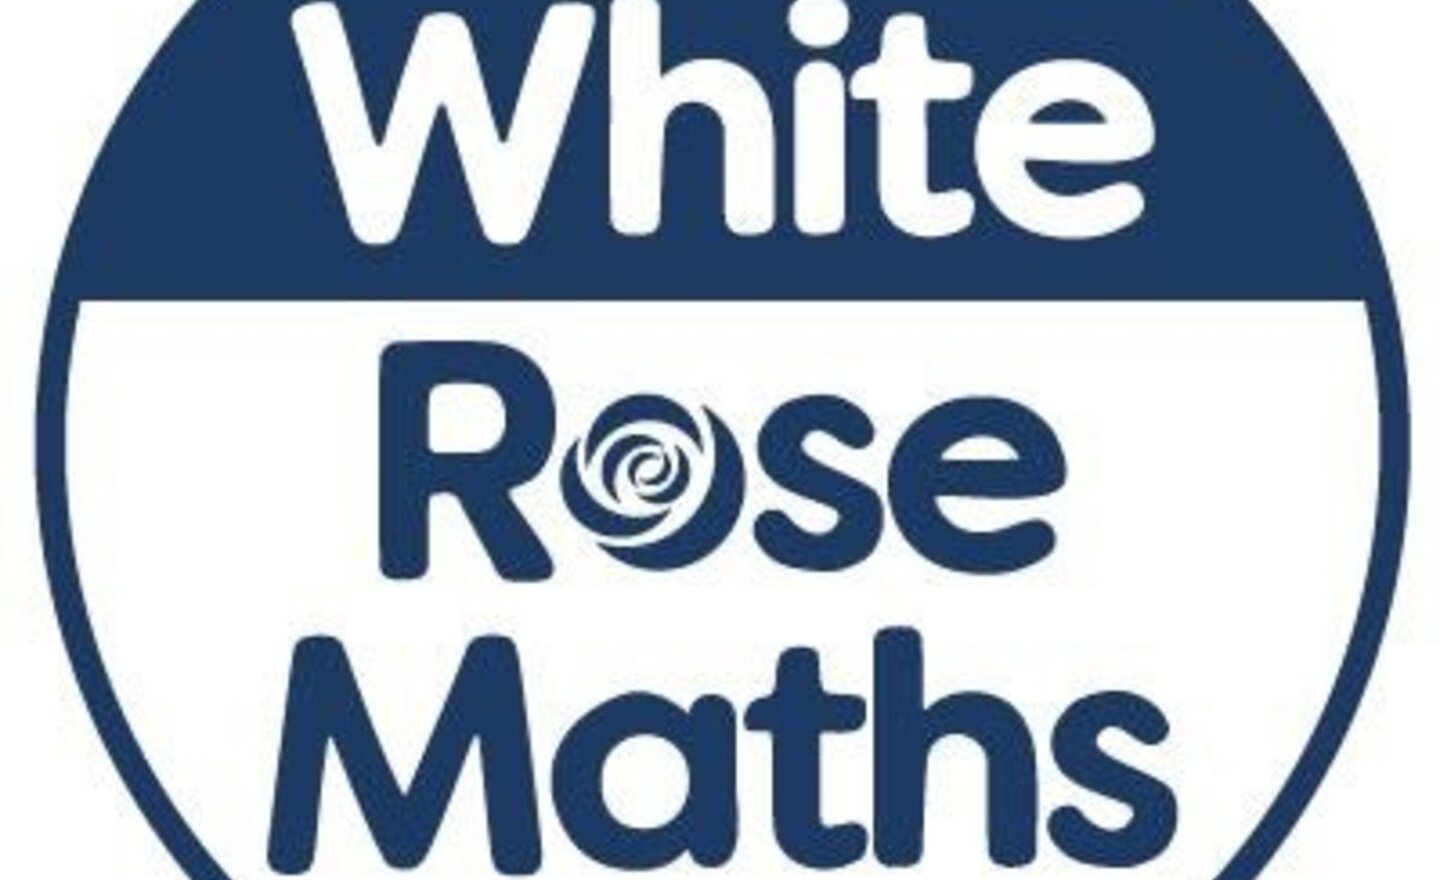 Image of White Rose Problem of the Day